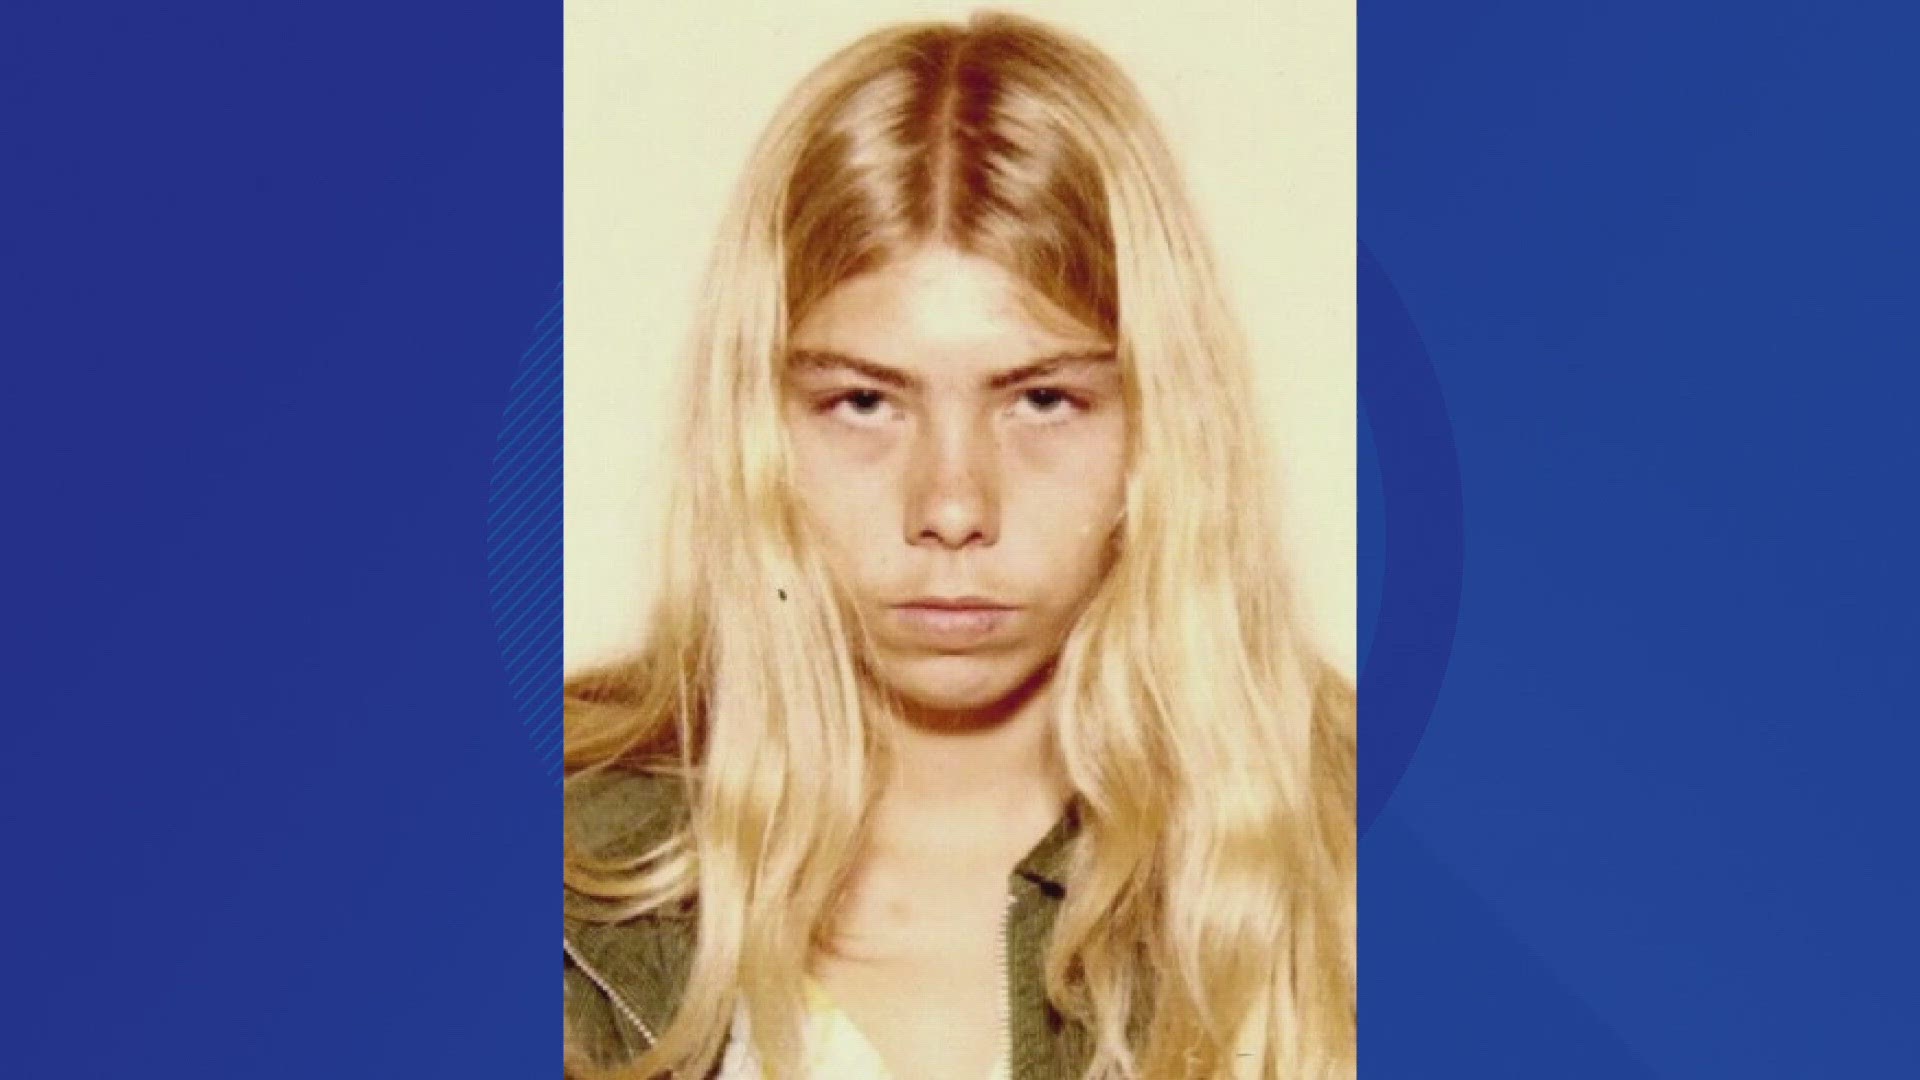 On Friday, TBI identified the woman as Michelle Inman, whose remains were found along I-24 in March 1985.